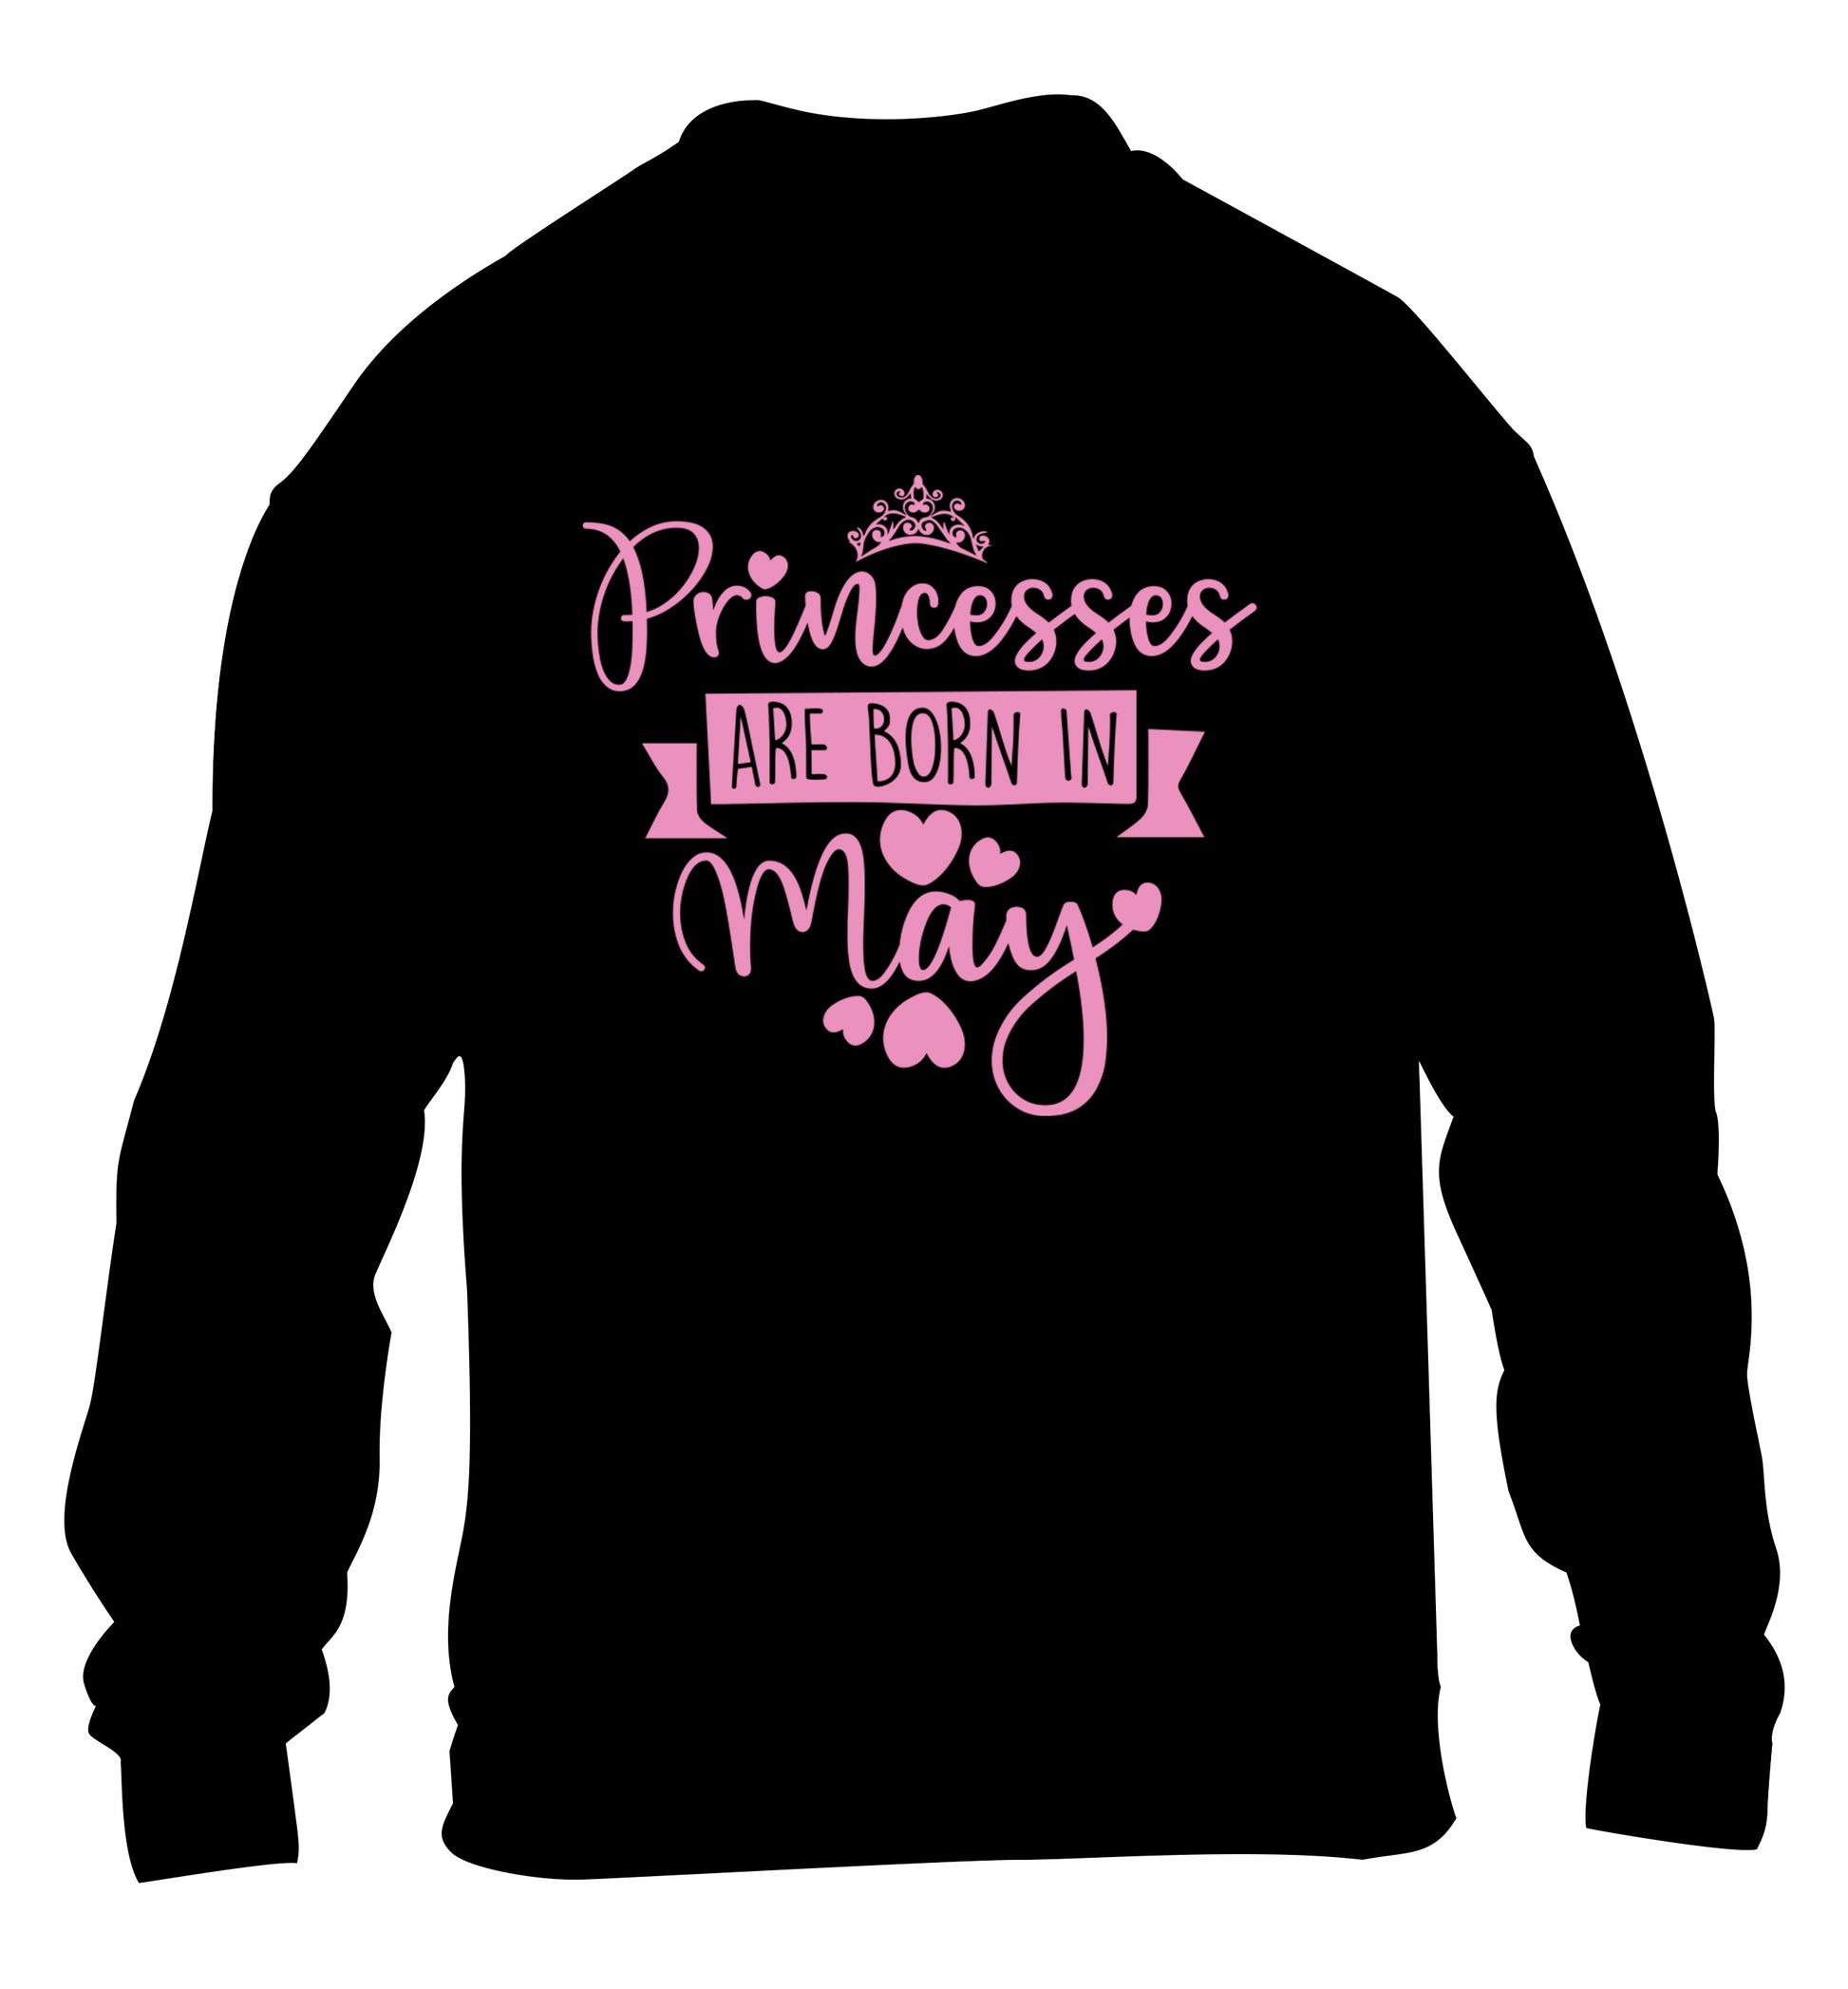 Princesses are born in May children's black sweater 12-13 Years